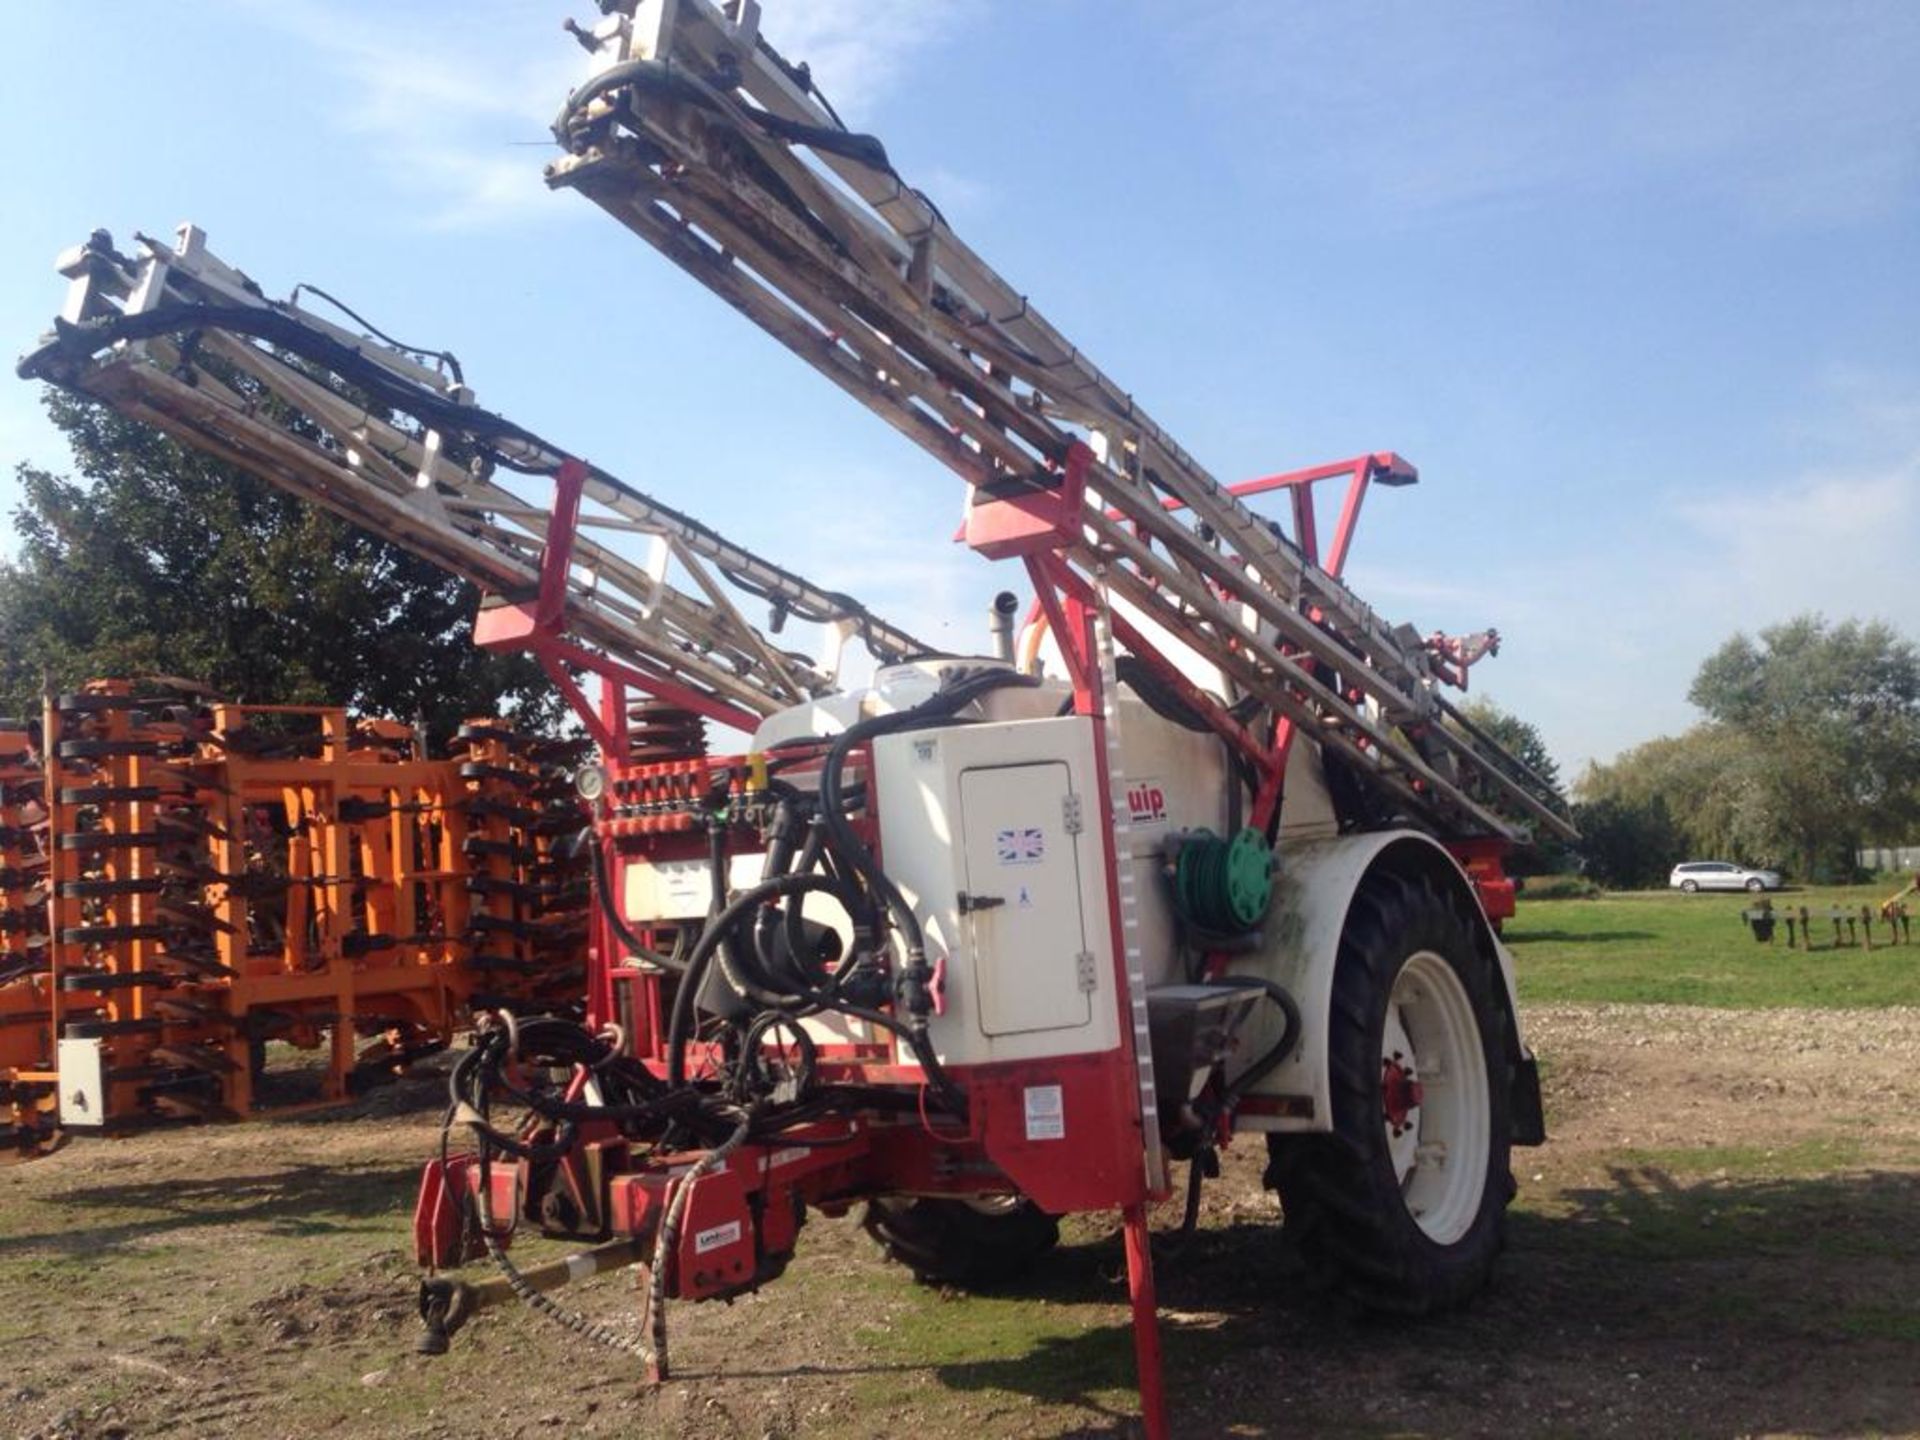 2008 Landquip 3500 Trailed Sprayer, 24m, 3500L Tank, 300L Clean Water, Tracking Steering, 6 Section - Image 6 of 6